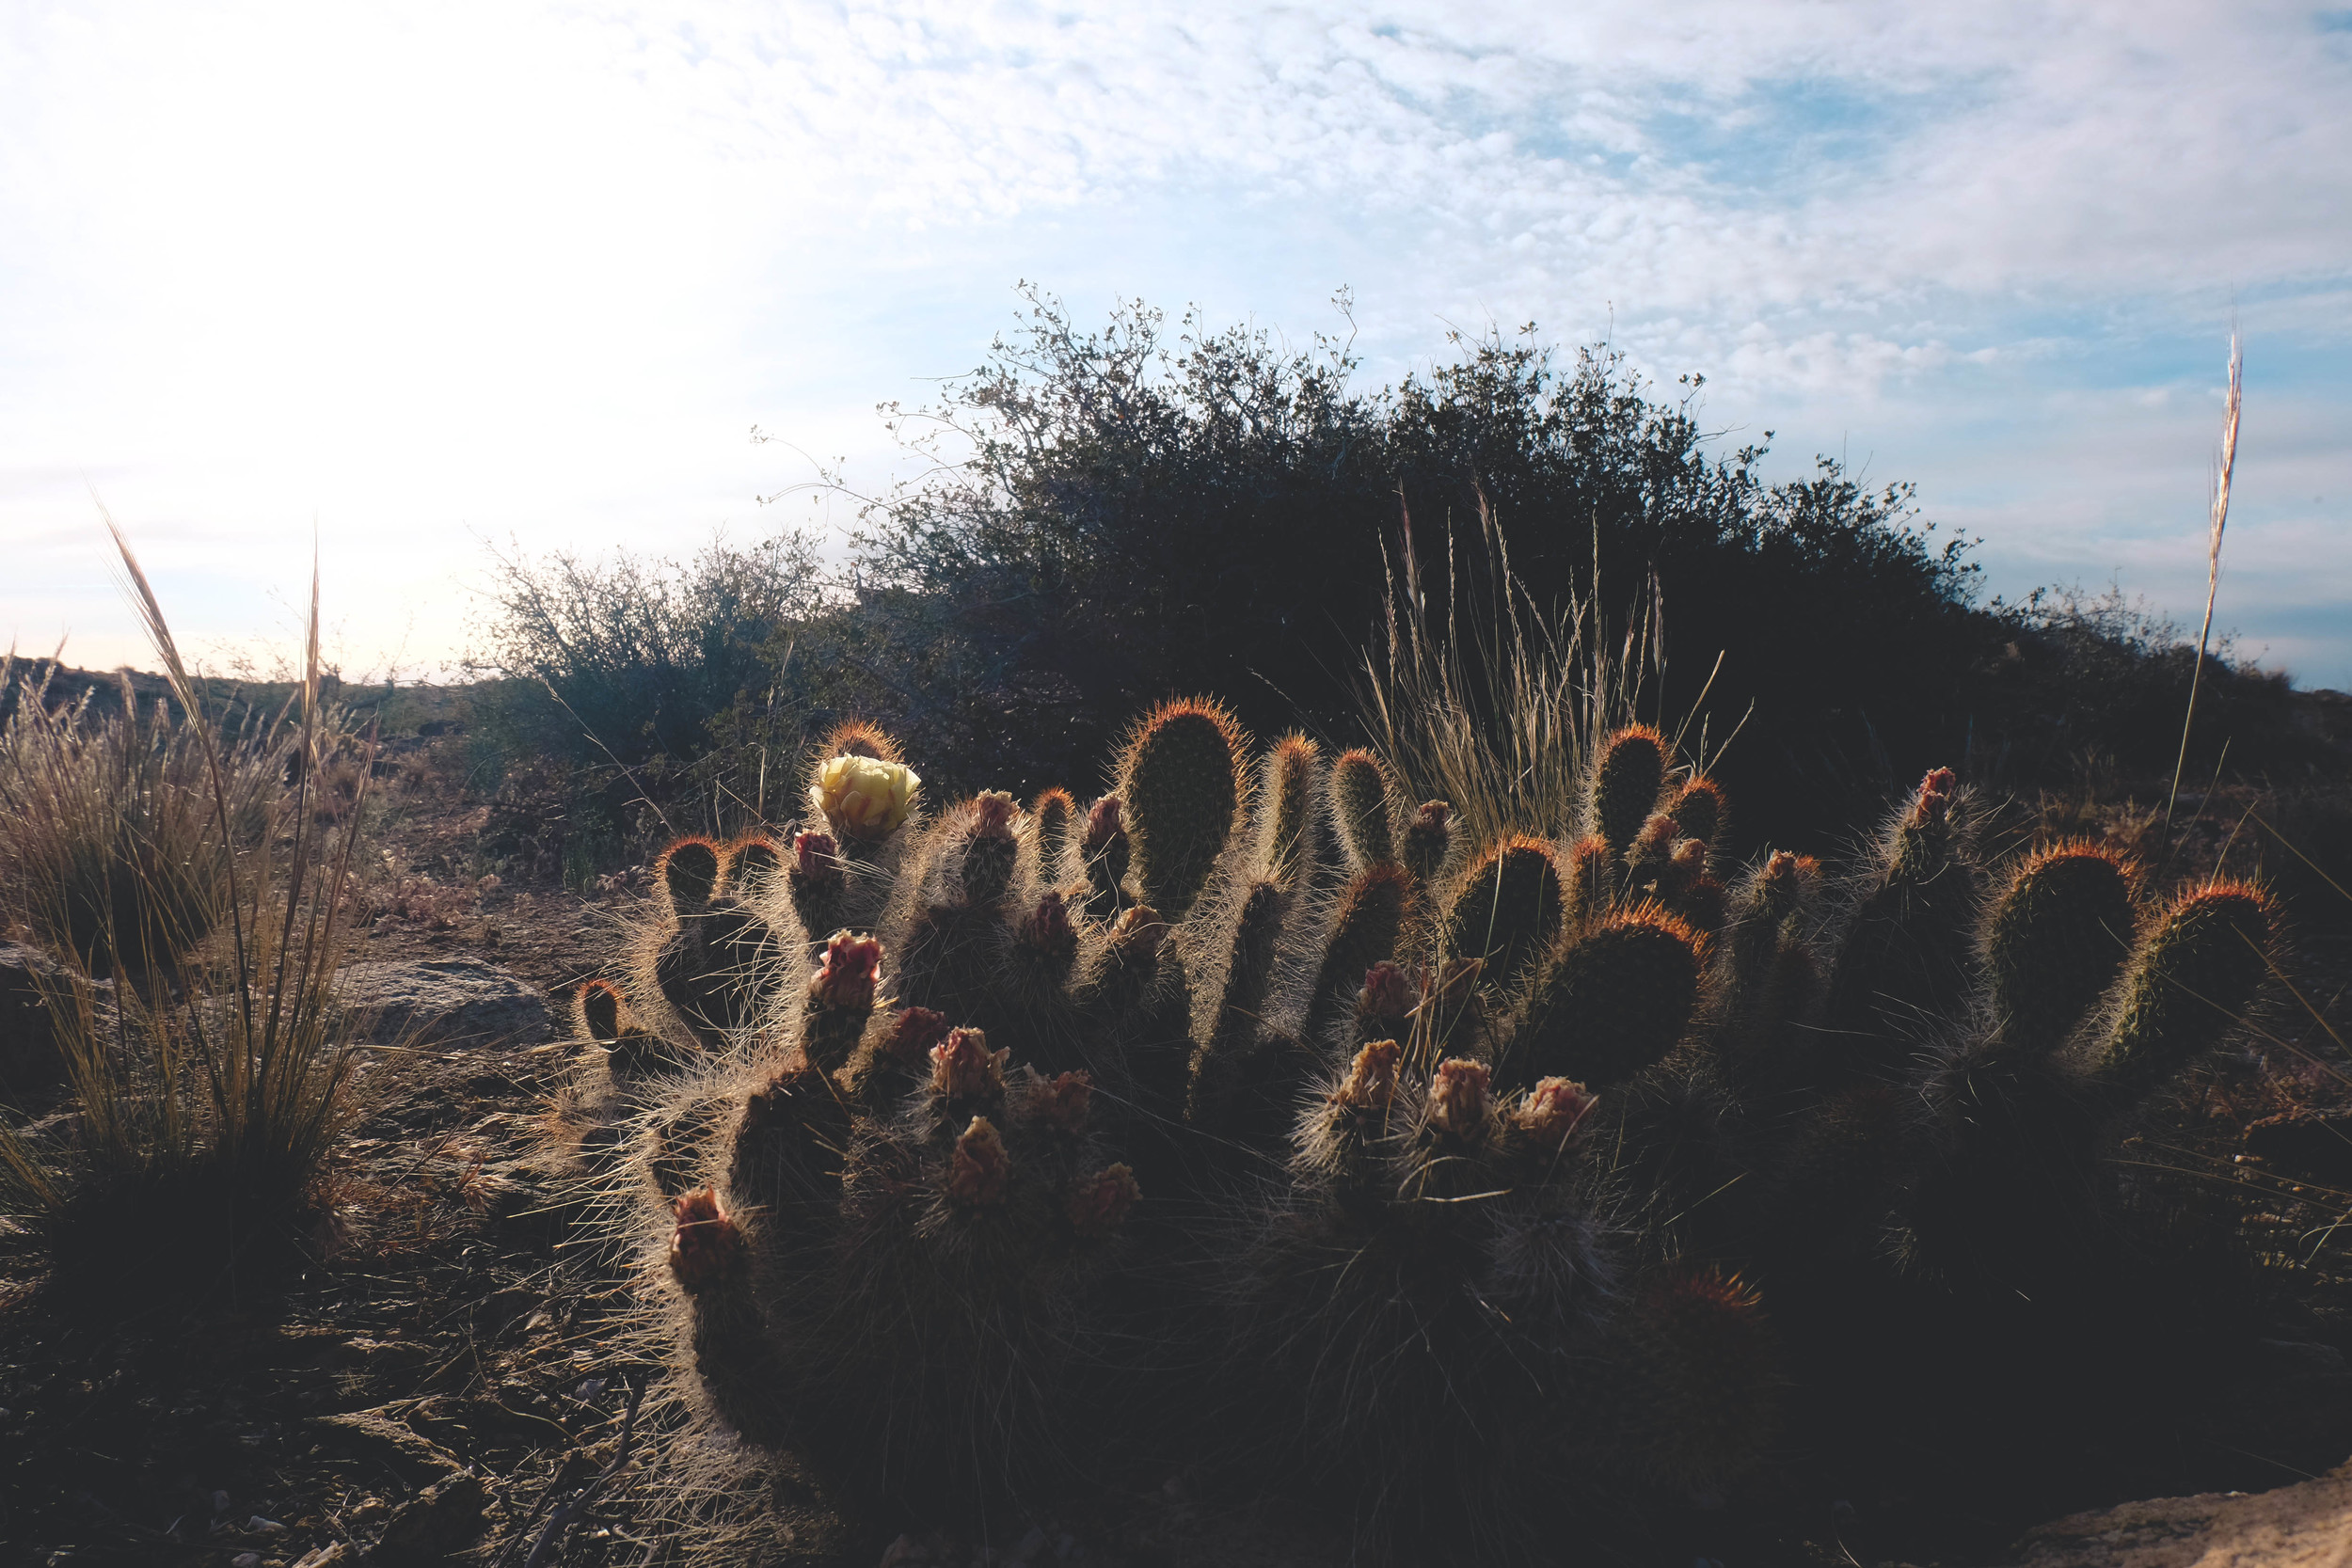  cactuseseseses. 